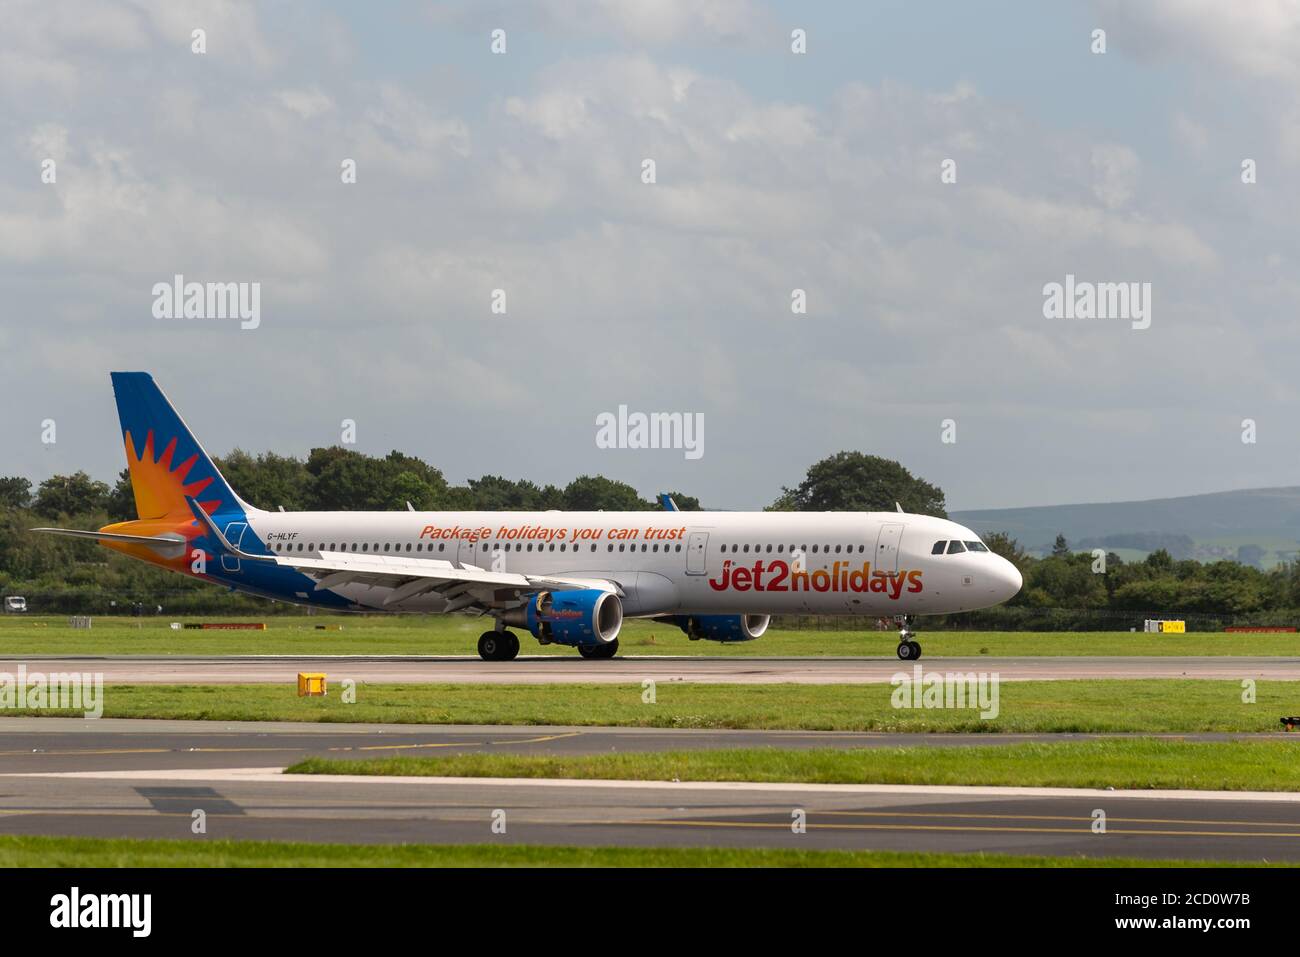 MANCHESTER UK, AUGUST 20 2020: Jet2holidays Airbus A321-211 flight LS962 from Dubrovnik Airport, Croatia, is documented braking with reverse thrust af Stock Photo